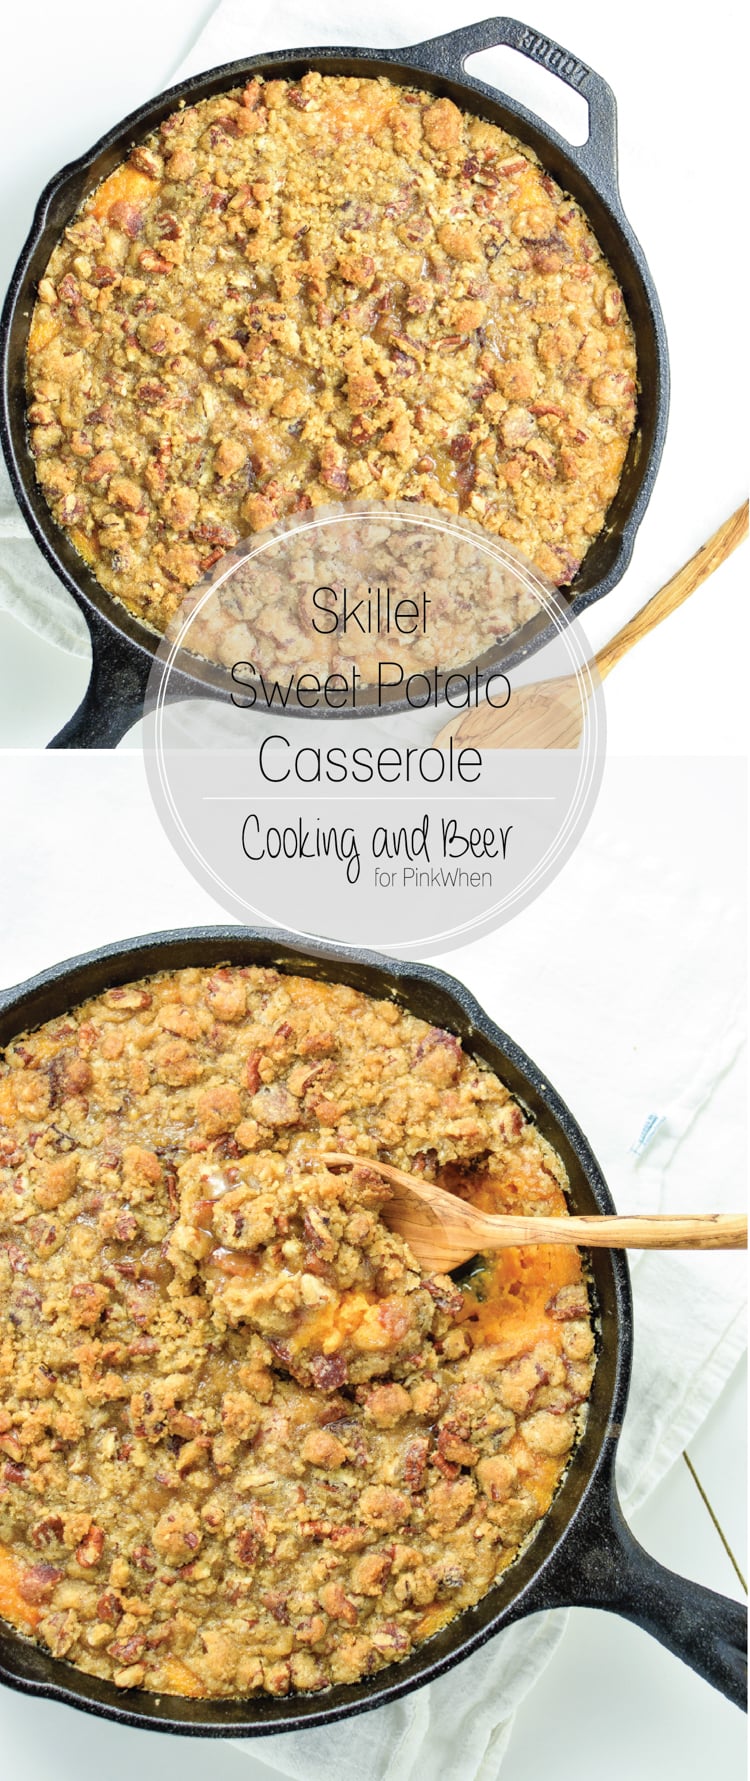 Skillet Sweet Potato Casserole with Bacon, Brown Sugar Crumble